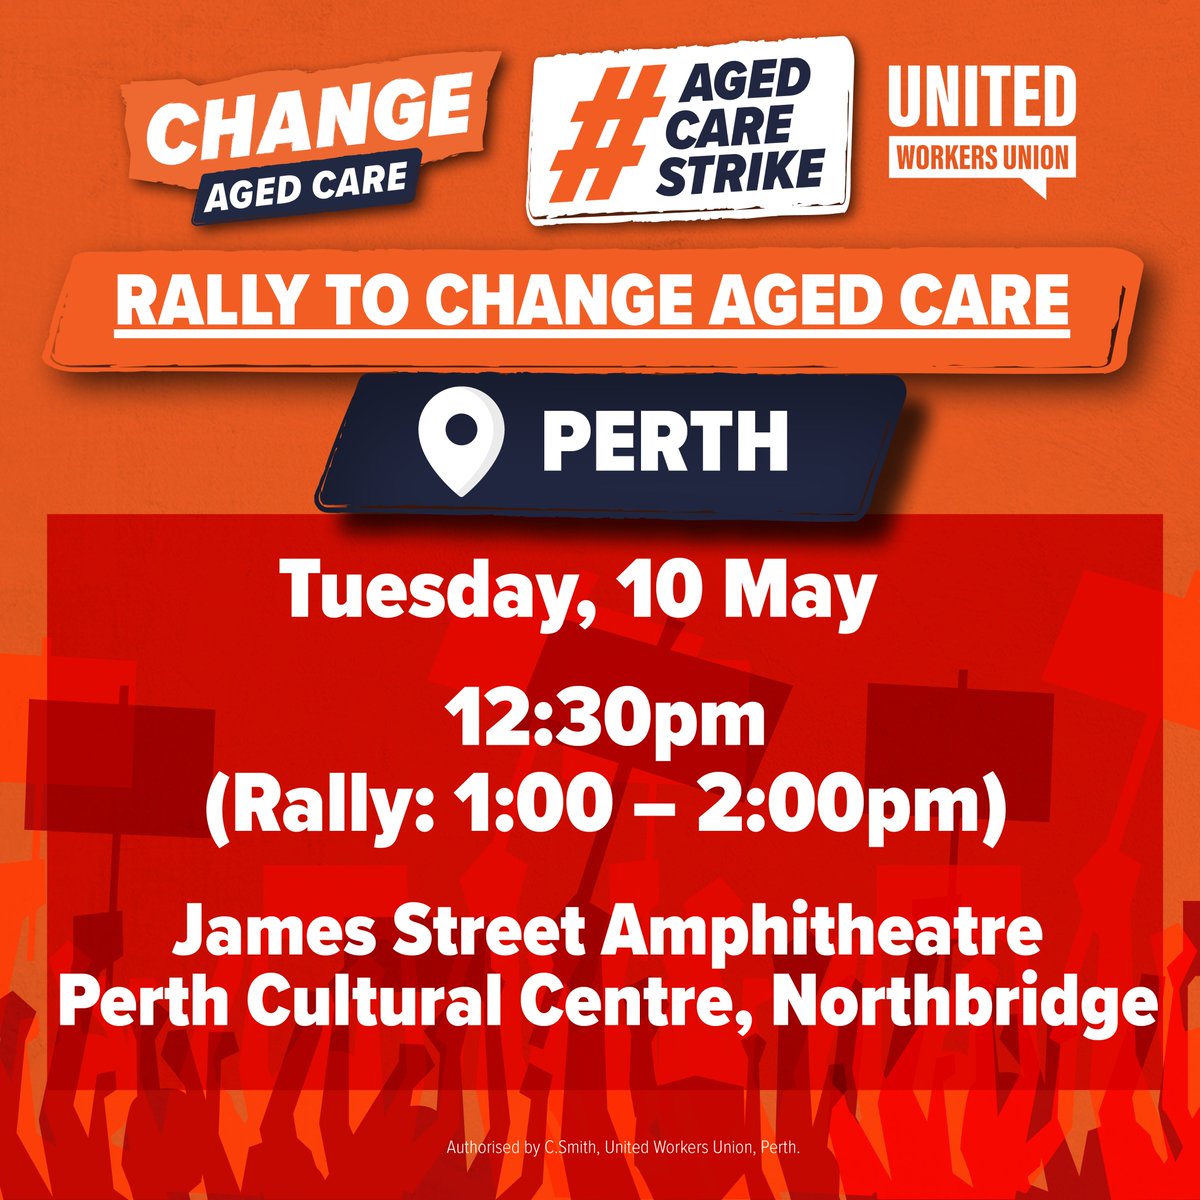 Tommorrow, come stand in solidarity with aged care workers across the country striking for change and better aged care!💪 #agedcarestrike